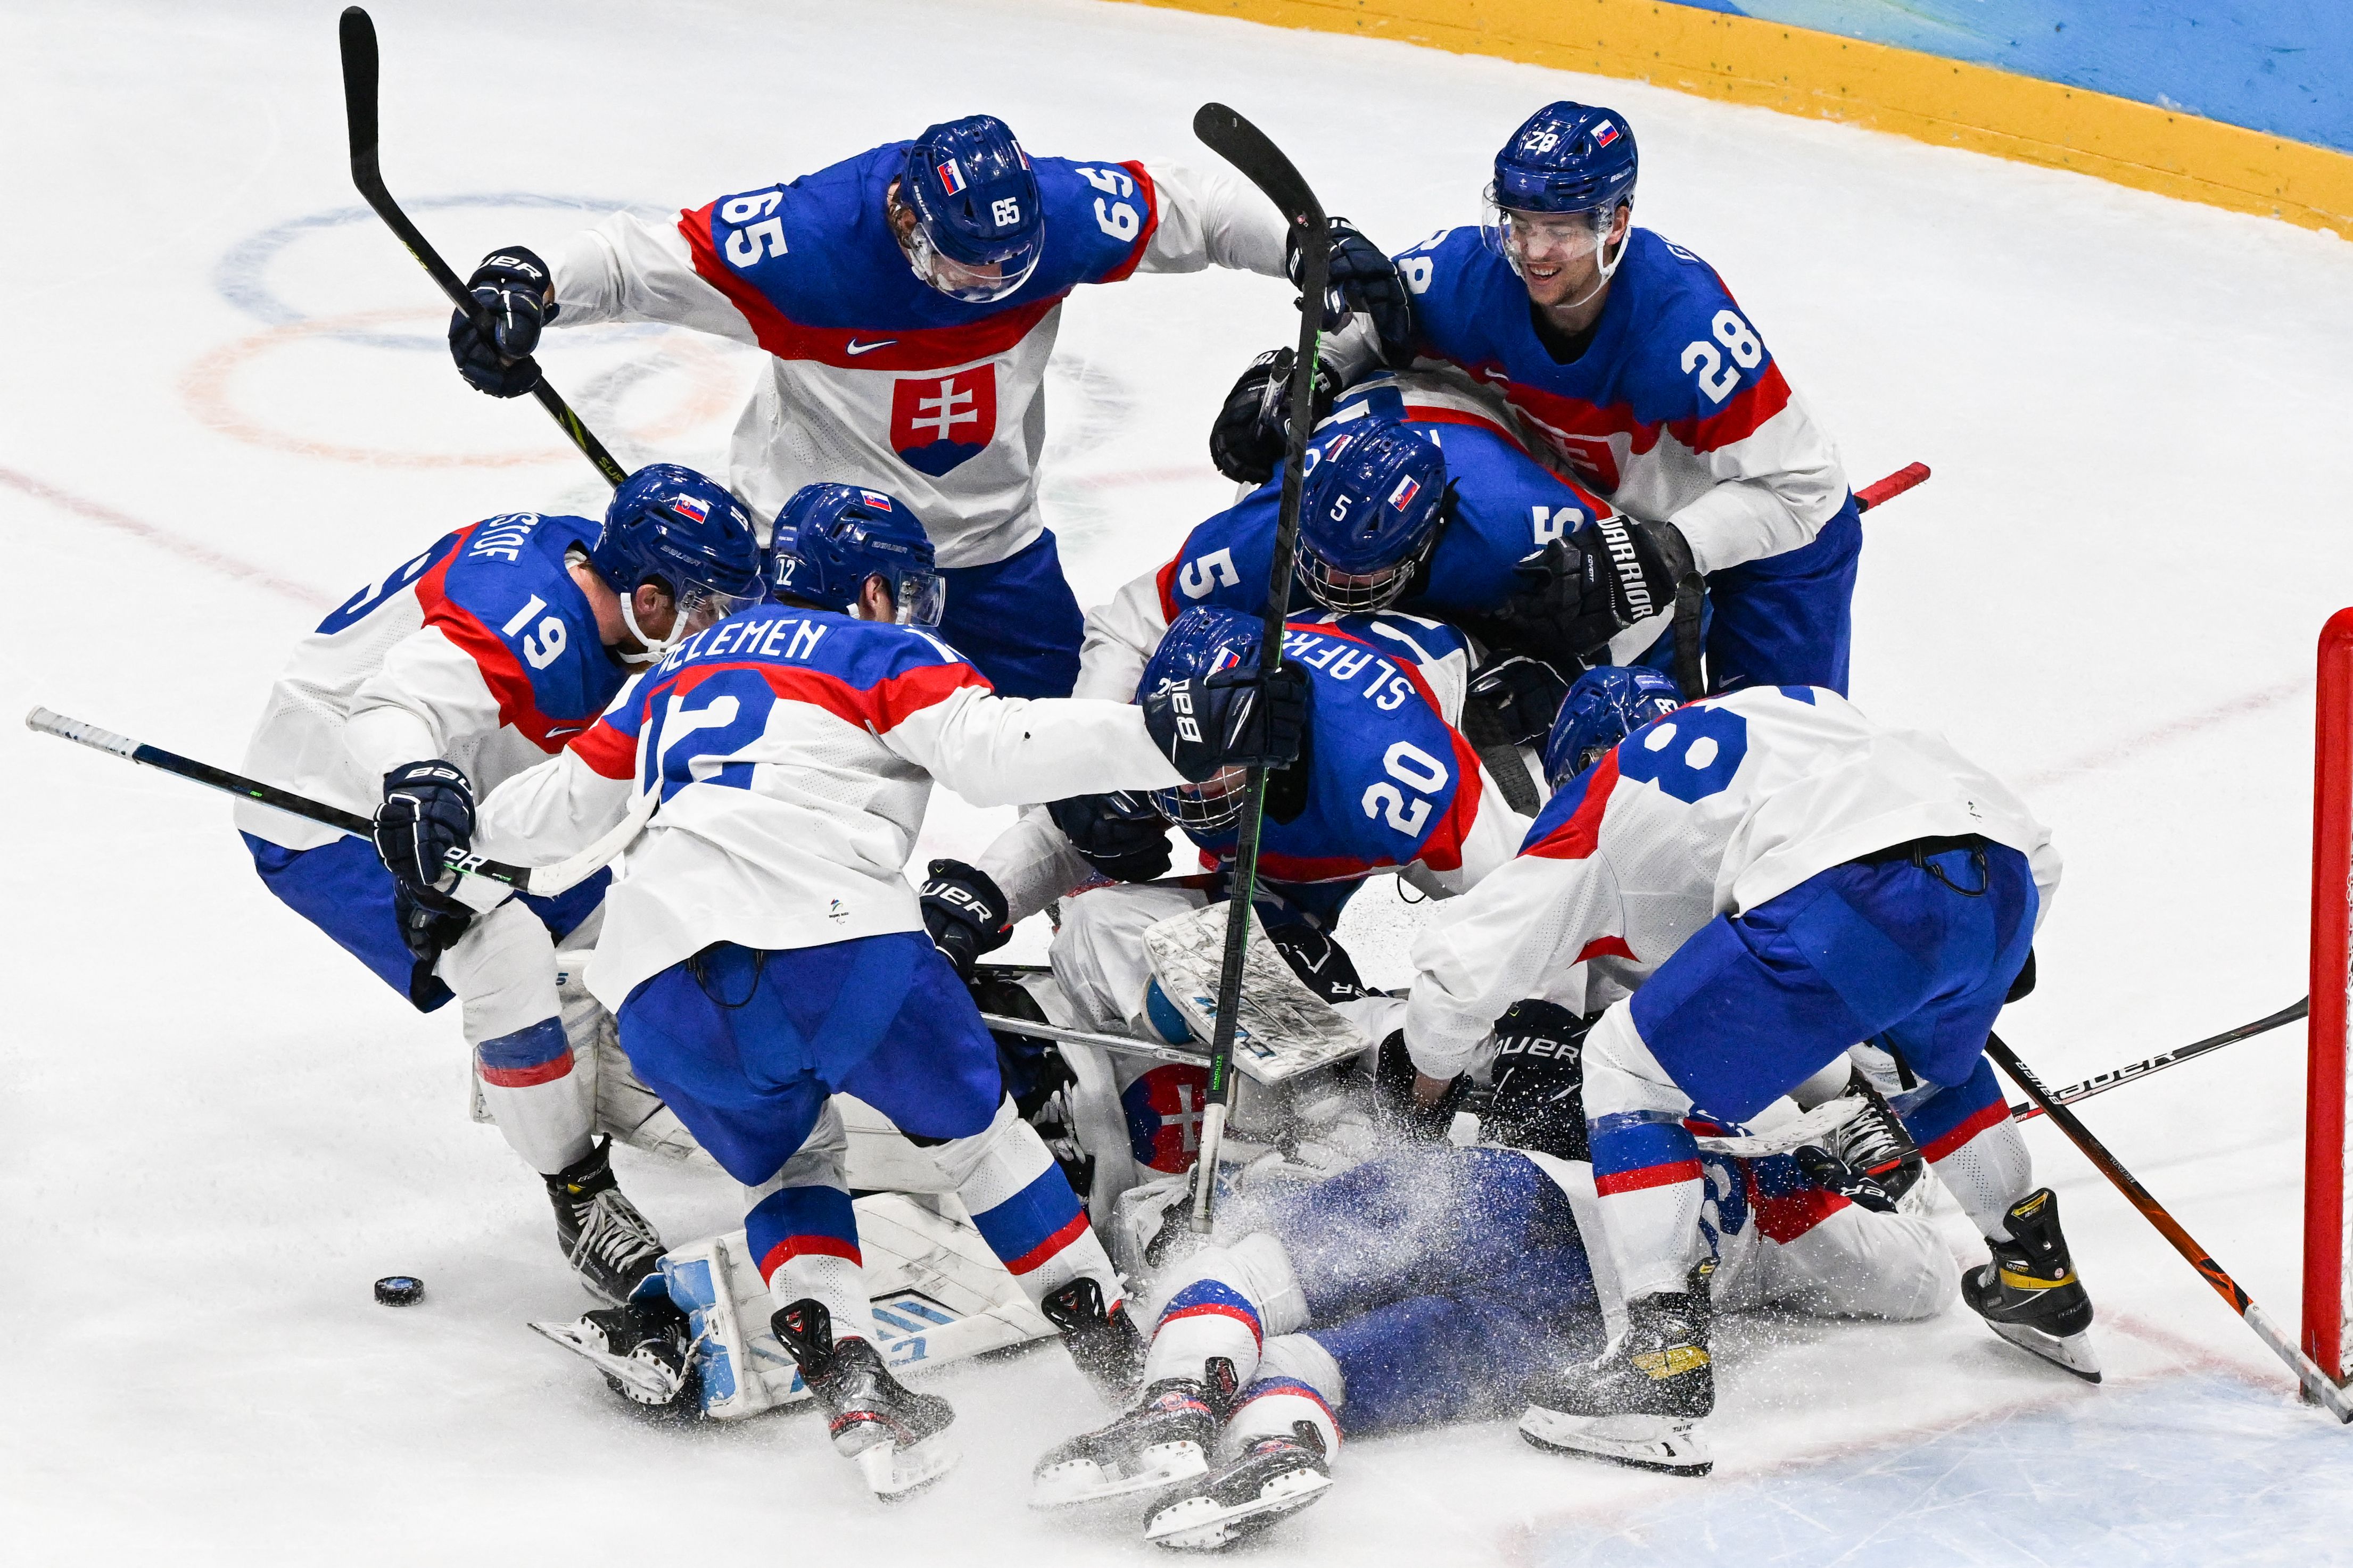 Slovakia’s players celebrate victory during the men’s play-off quarterfinal match of the Beijing 2022 Winter Olympic Games ice hockey competition between USA and Slovakia, at the National Indoor Stadium in Beijing on February 16, 2022.